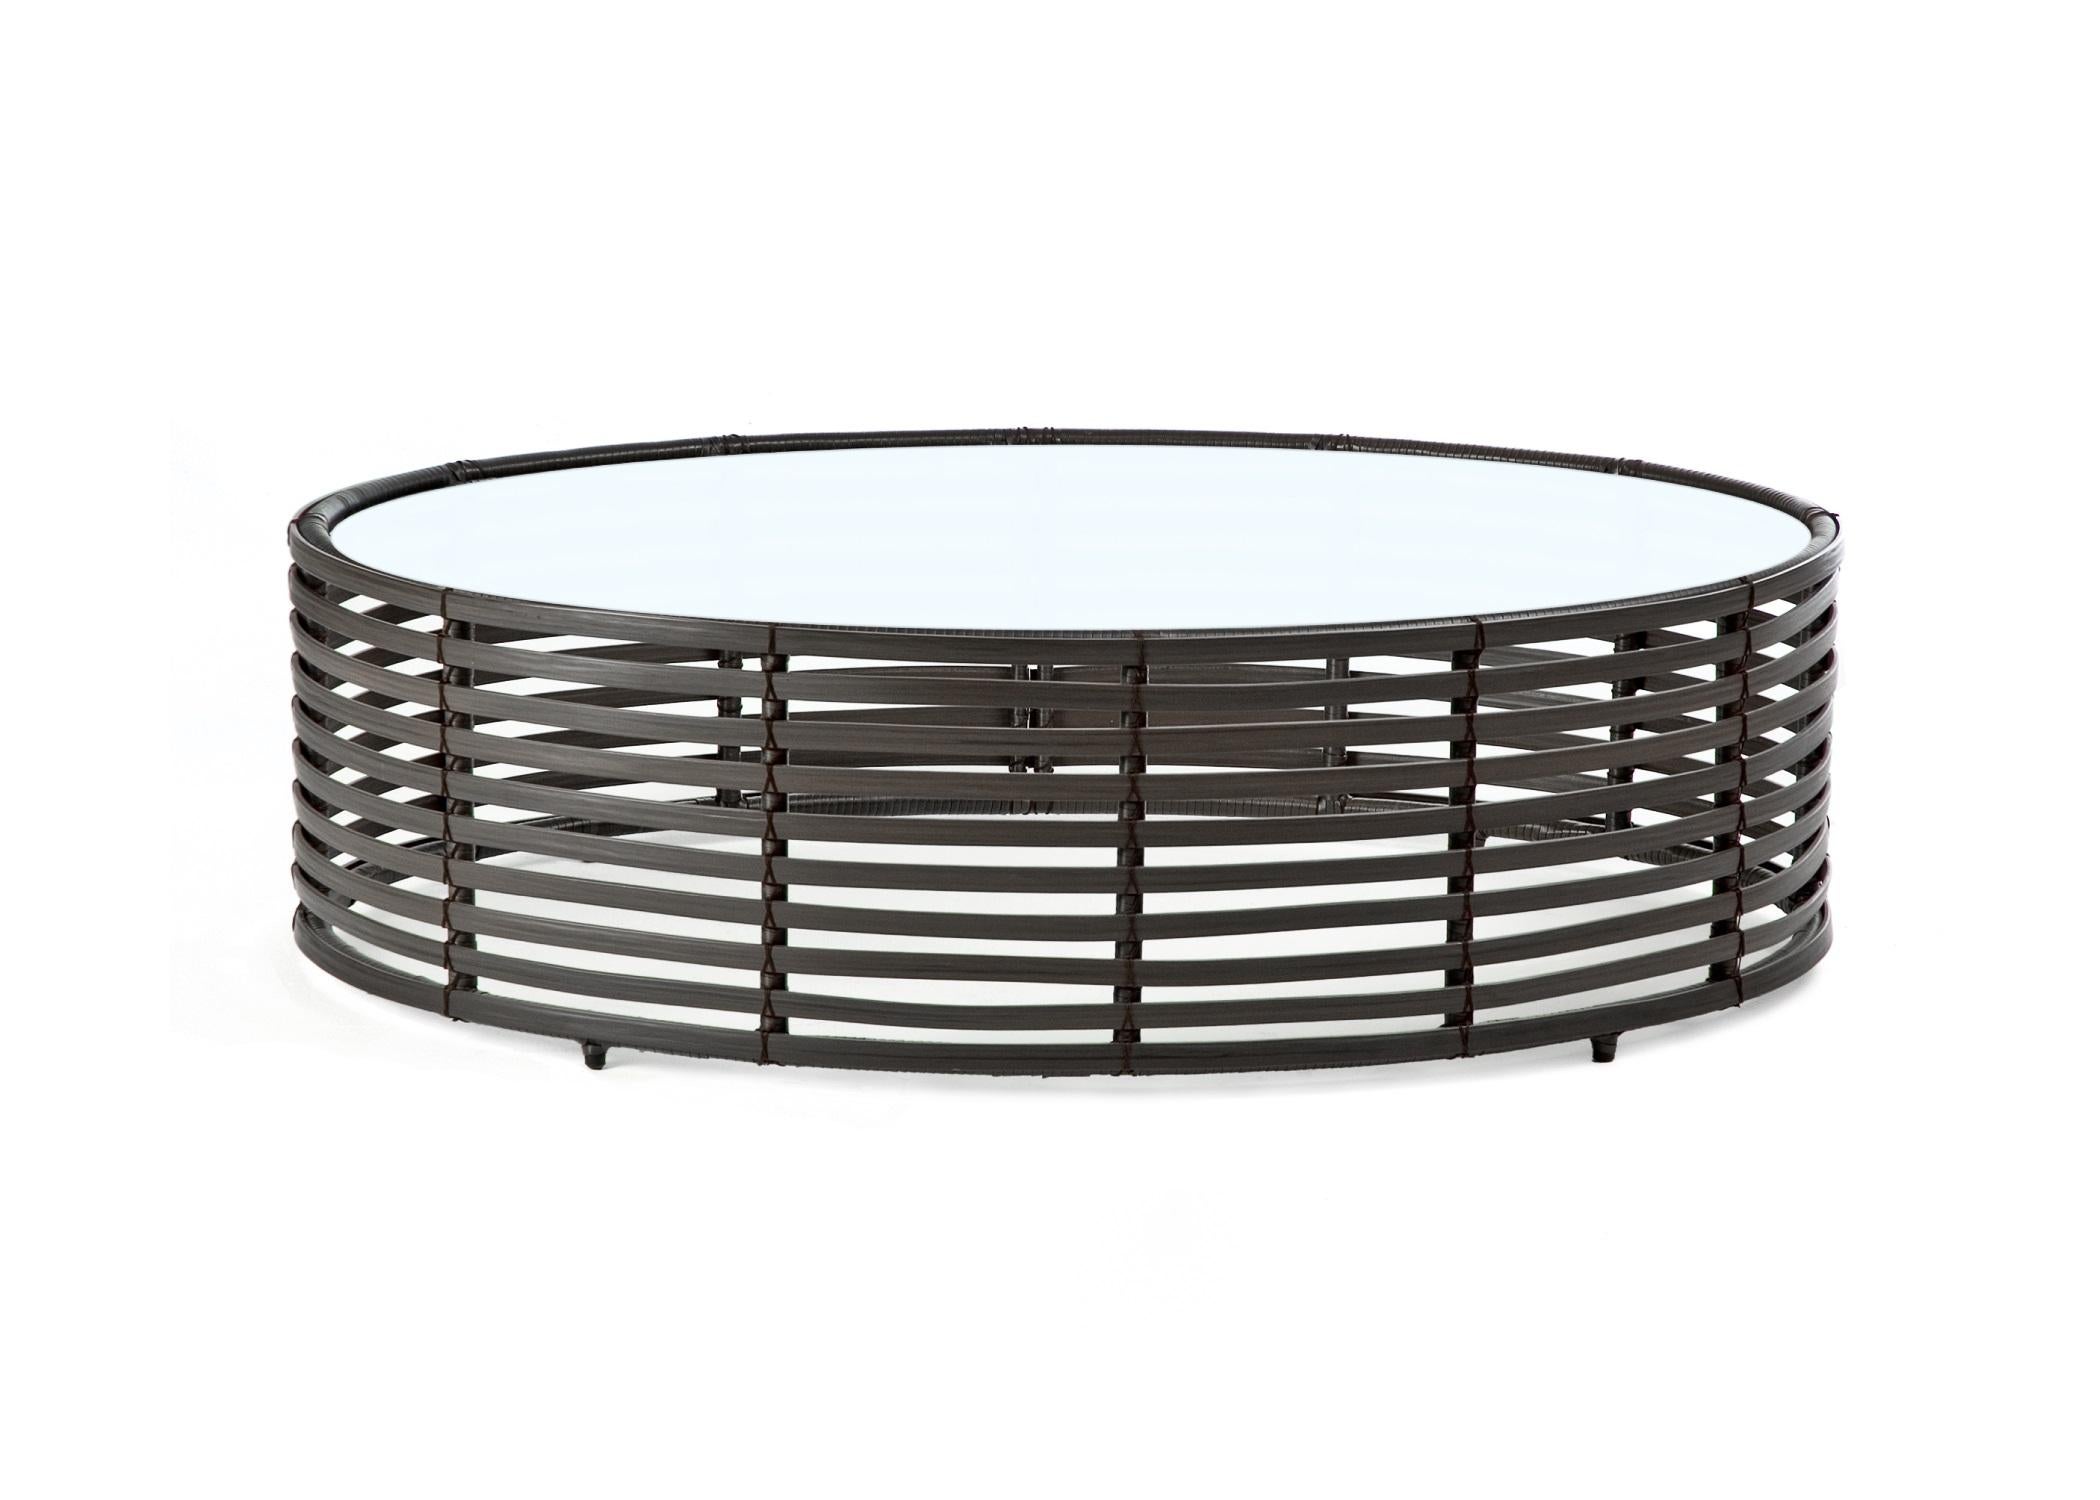 Outdoor large oval Lolah coffee table by Kenneth Cobonpue
Materials: Polyethelene, aluminum. Glass.
Also available in other colors and for indoors. 
Dimensions: 
Glass 78cm x 118cm x H 10mm
Table 80cm x 120 cm x H 35 cm


Created using